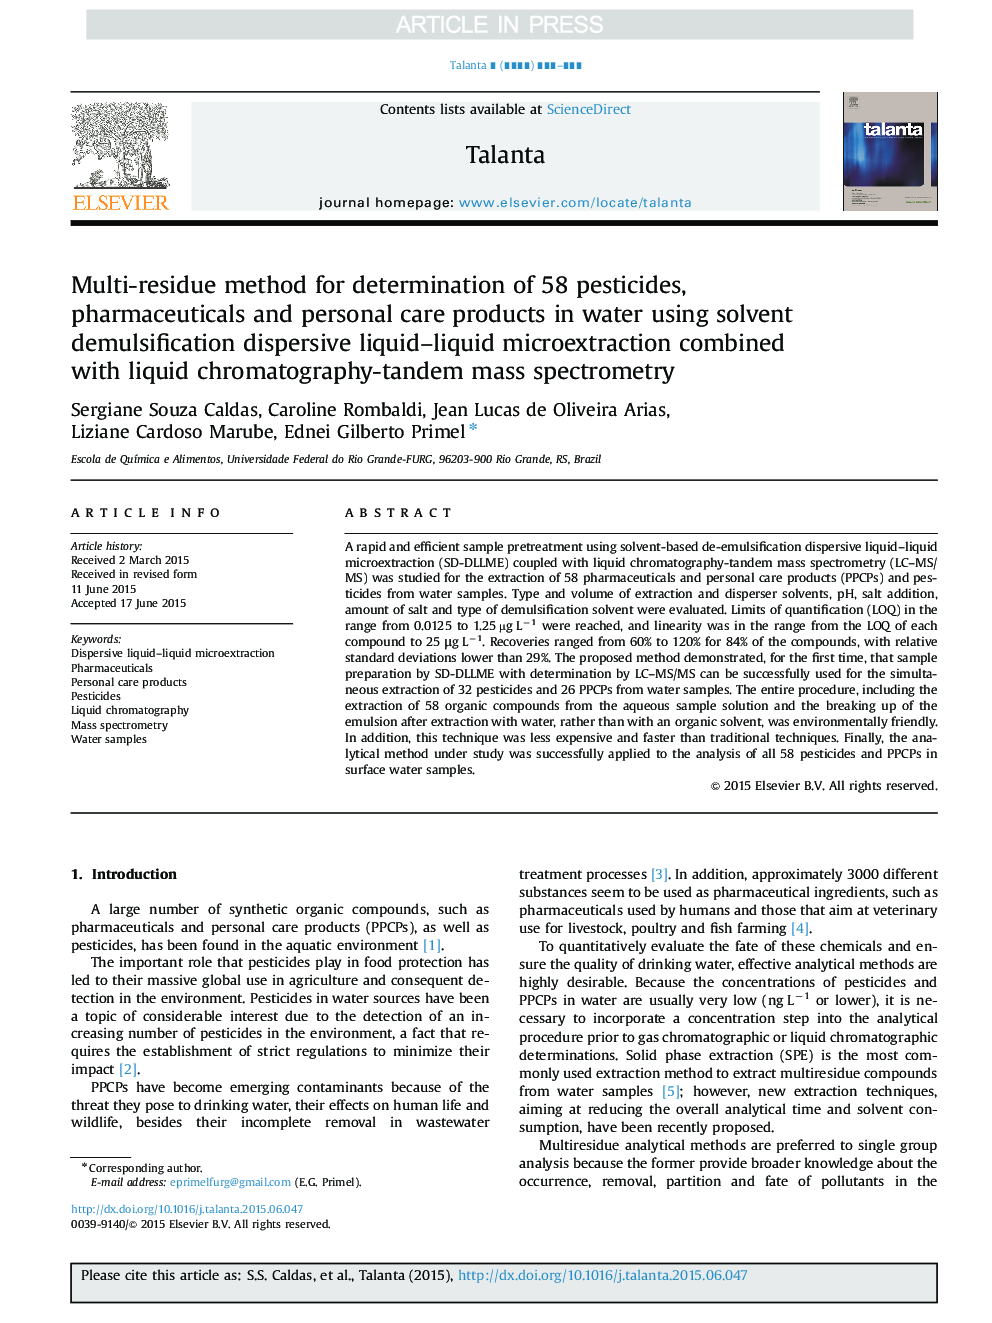 Multi-residue method for determination of 58 pesticides, pharmaceuticals and personal care products in water using solvent demulsification dispersive liquid-liquid microextraction combined with liquid chromatography-tandem mass spectrometry